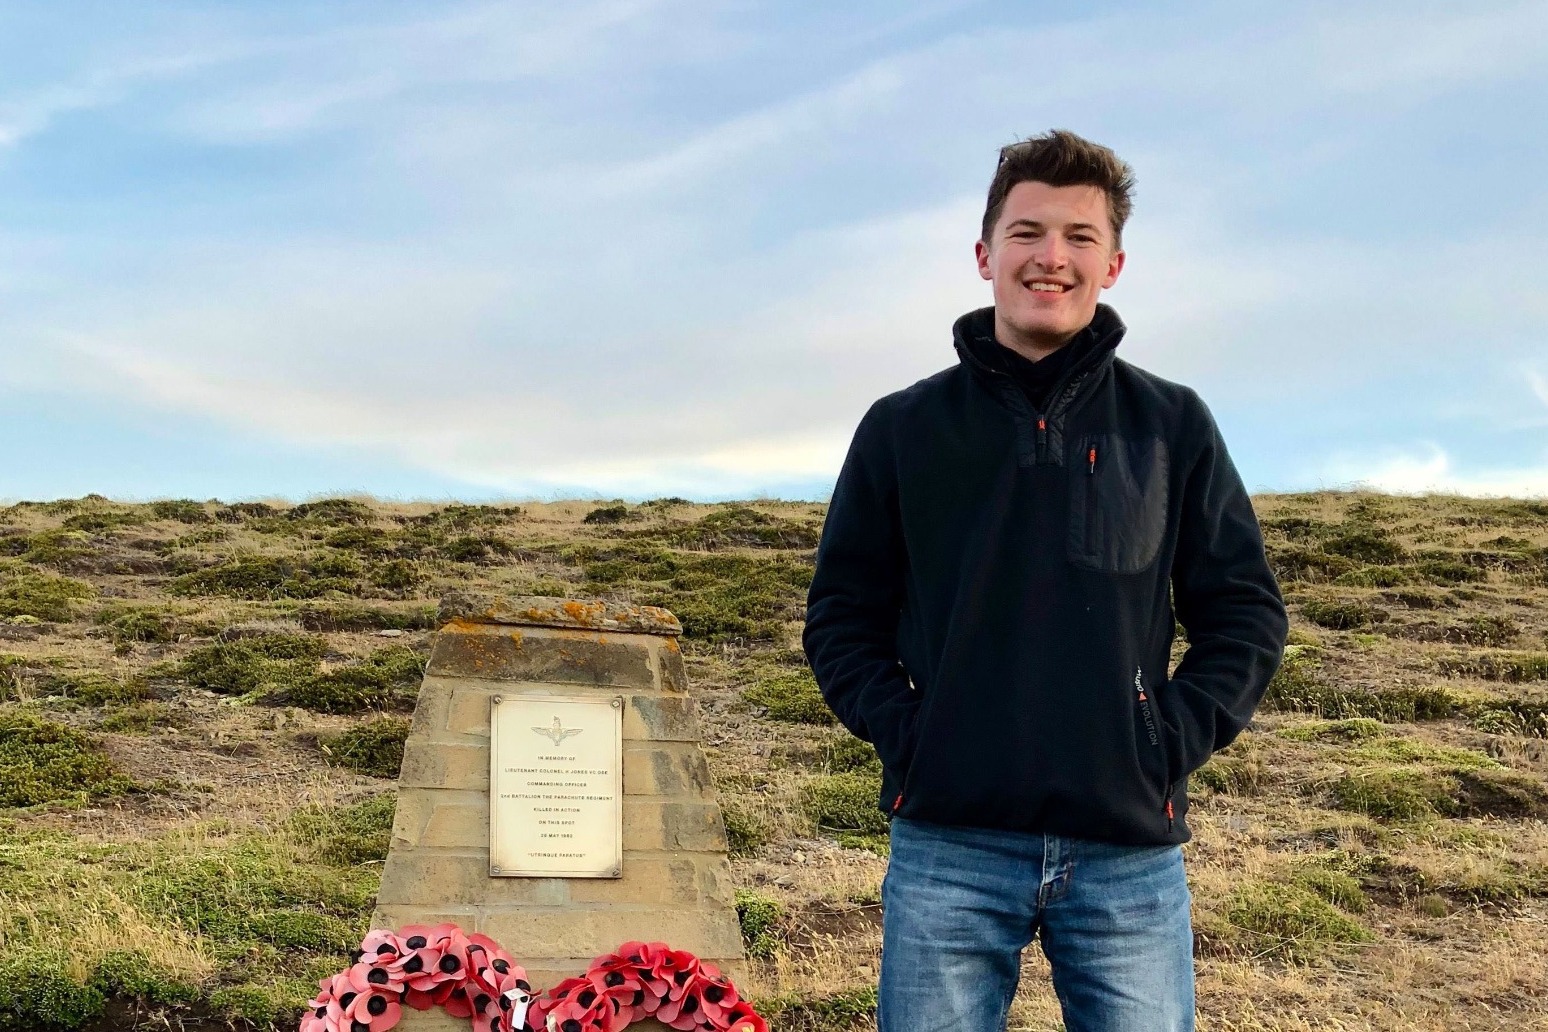 ‘The Falklands will always be special to me’, says Lt Col H Jones’ grandson 